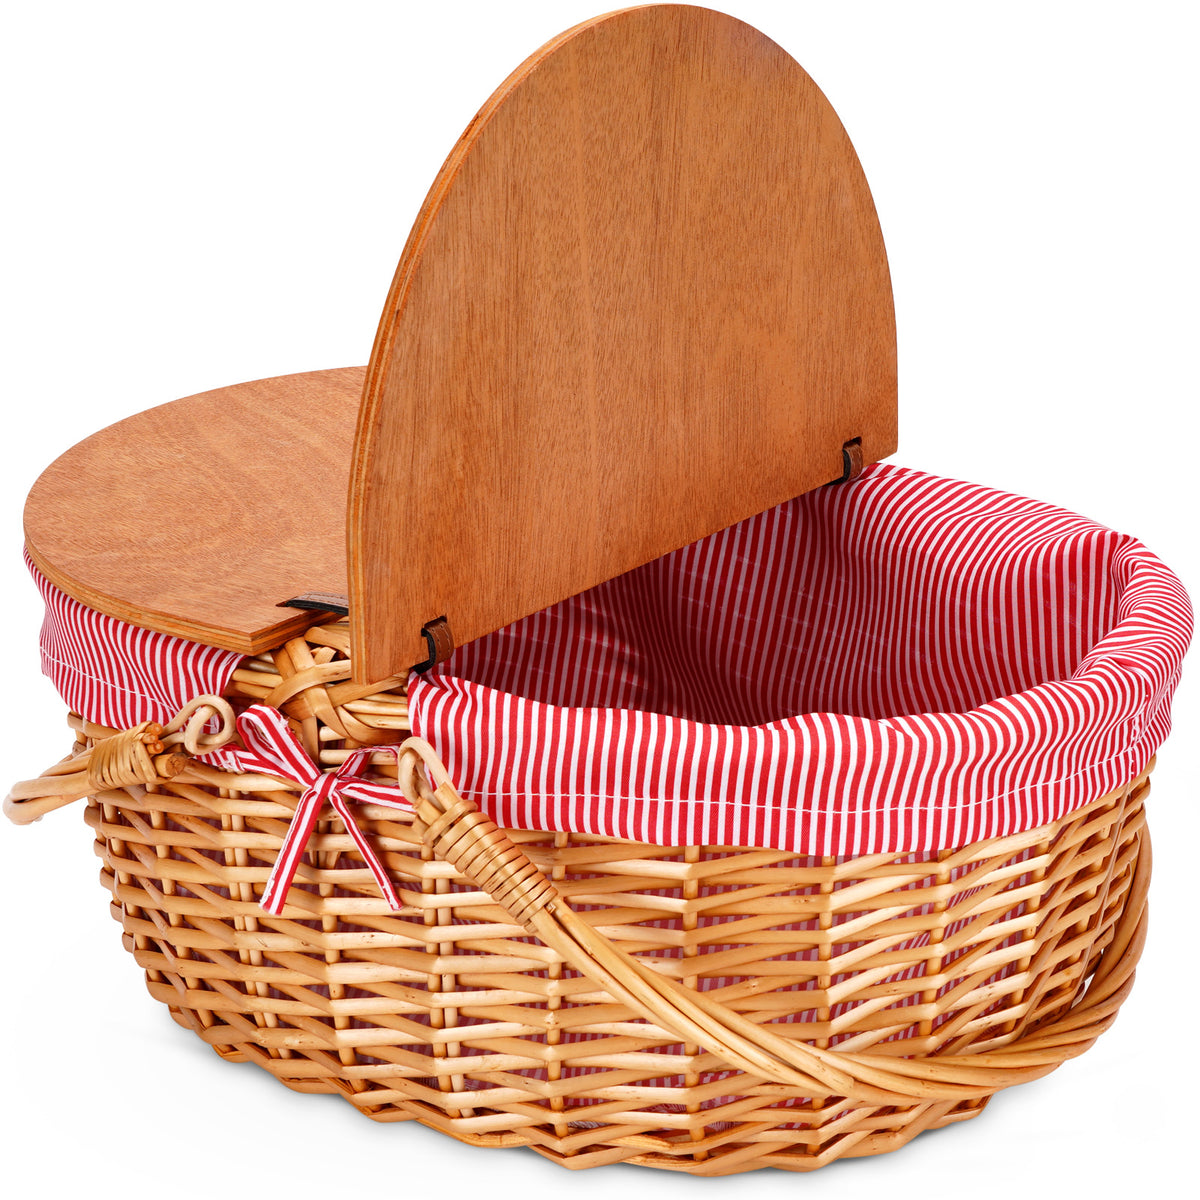 Classic Wicker Picnic Basket for 2 People